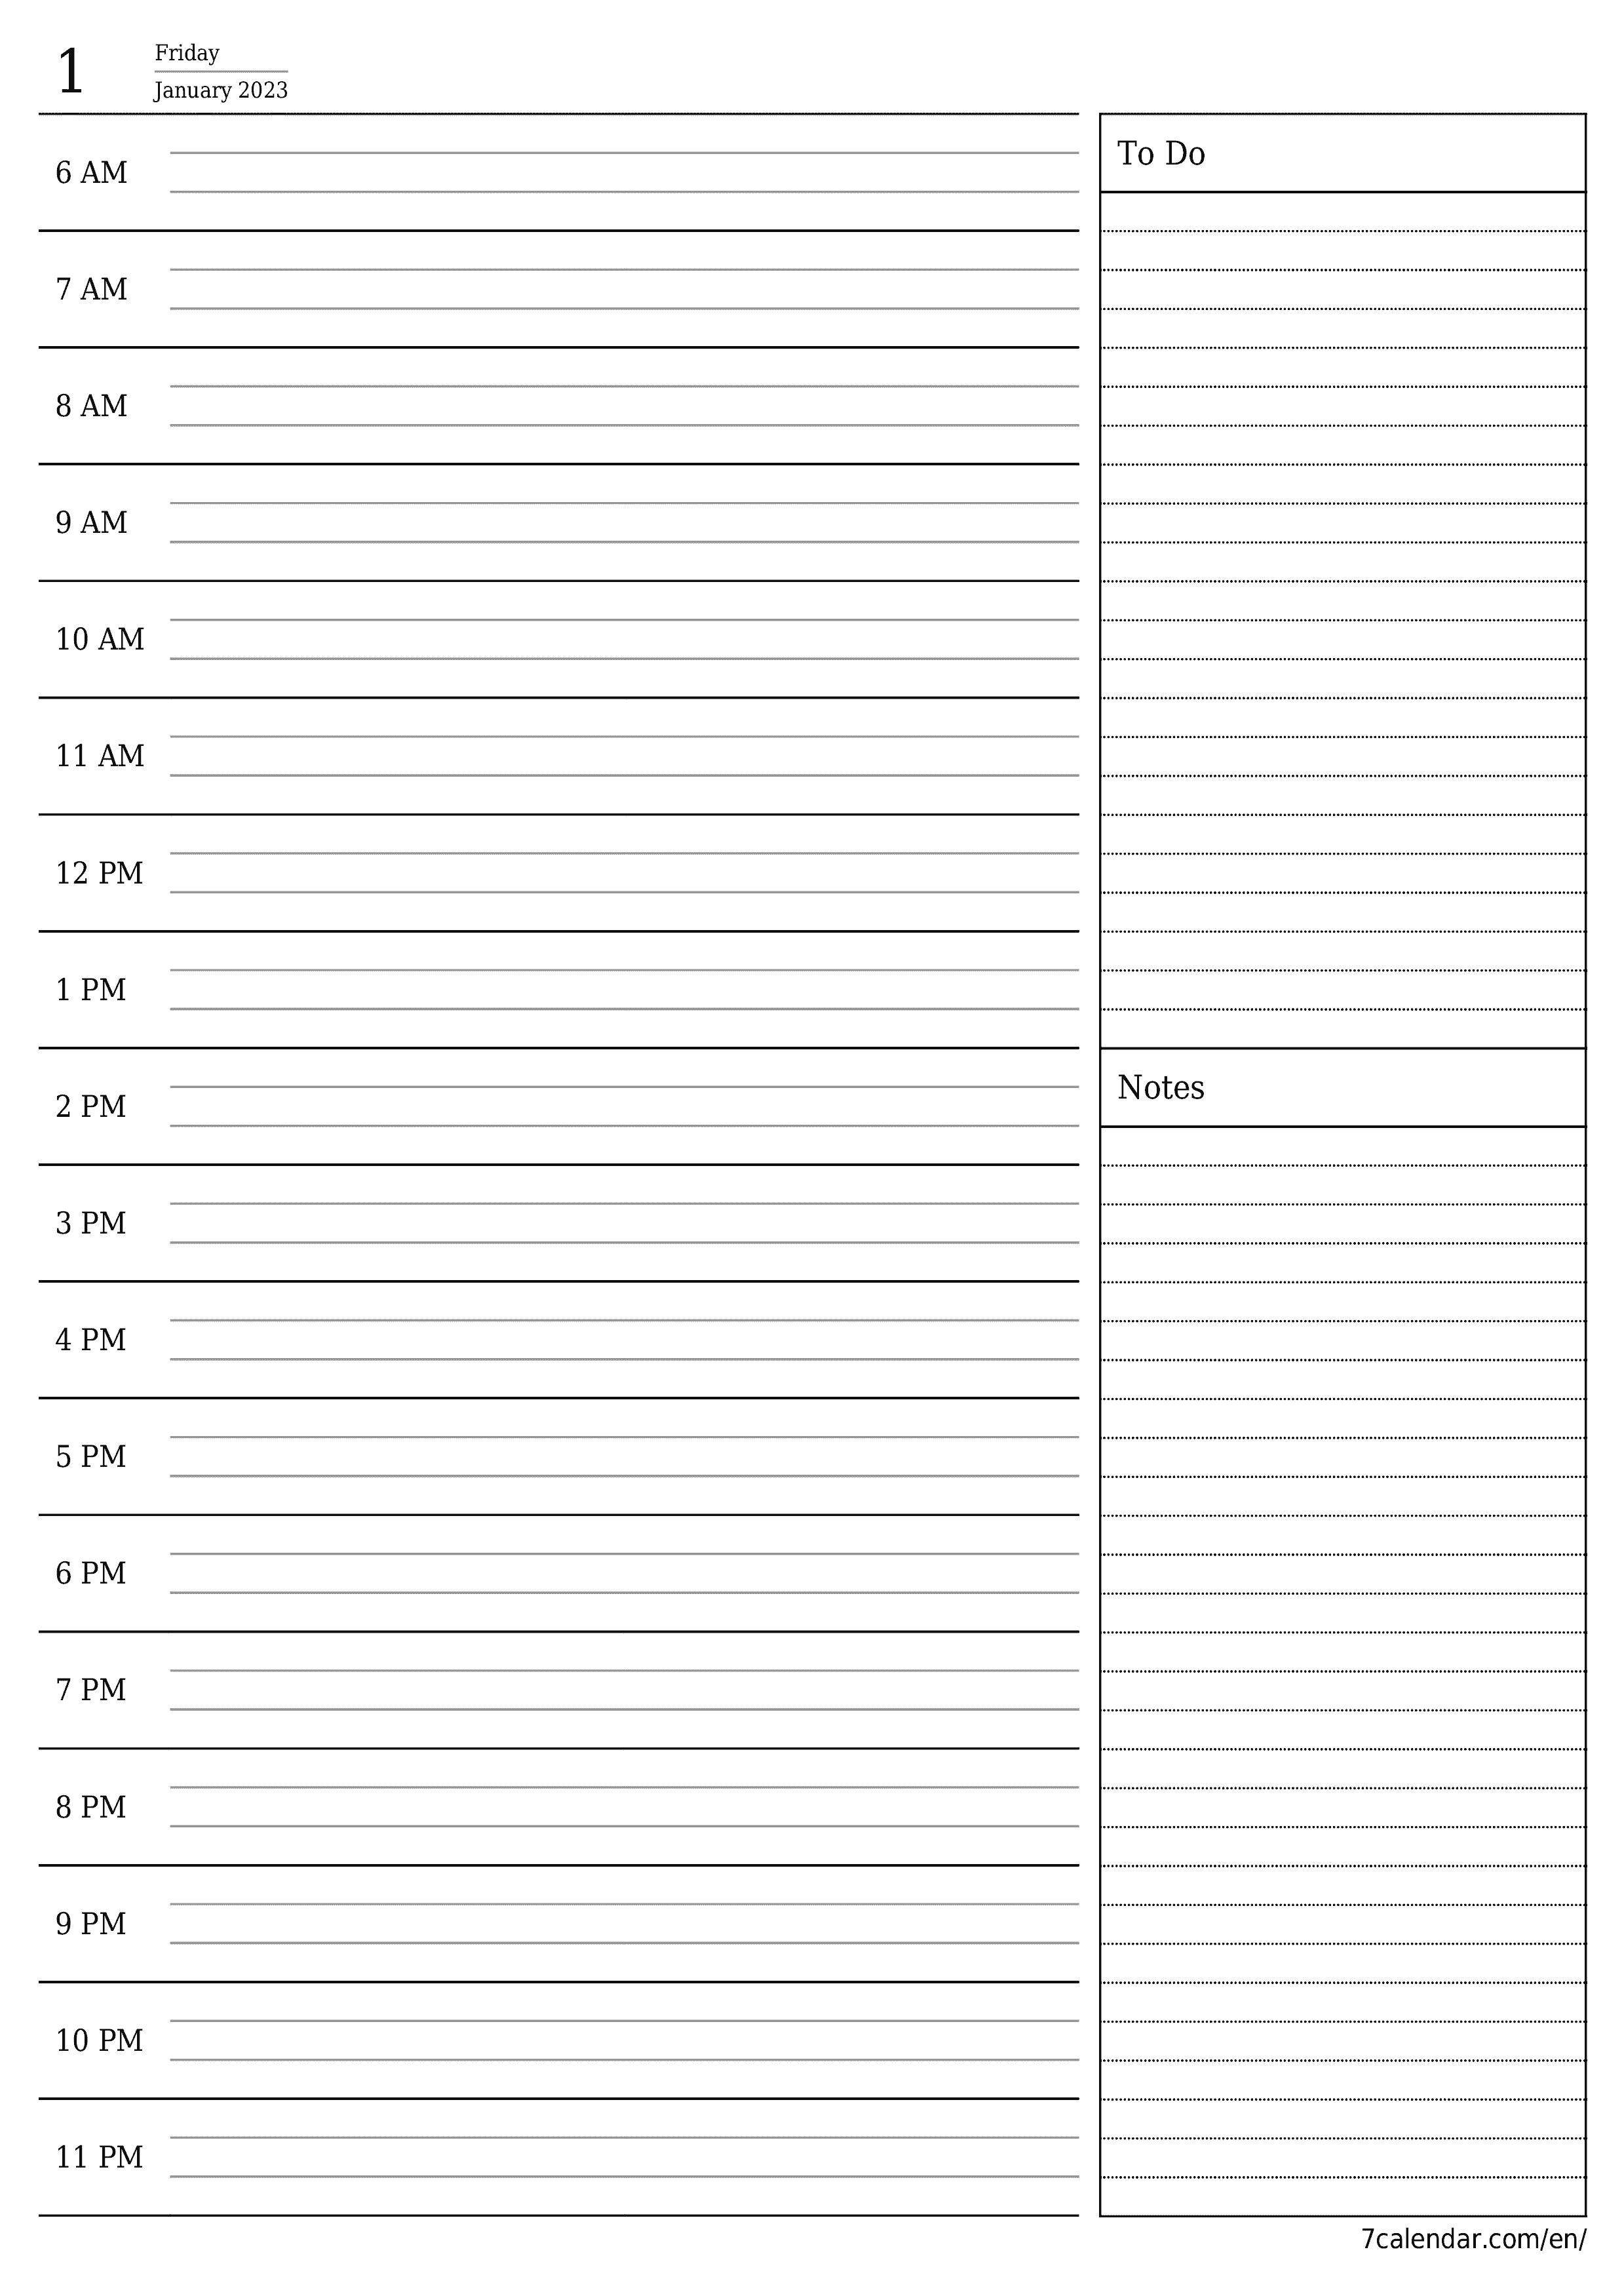 Blank daily printable calendar and planner for day January 2023 with notes, save and print to PDF PNG English - 7calendar.com